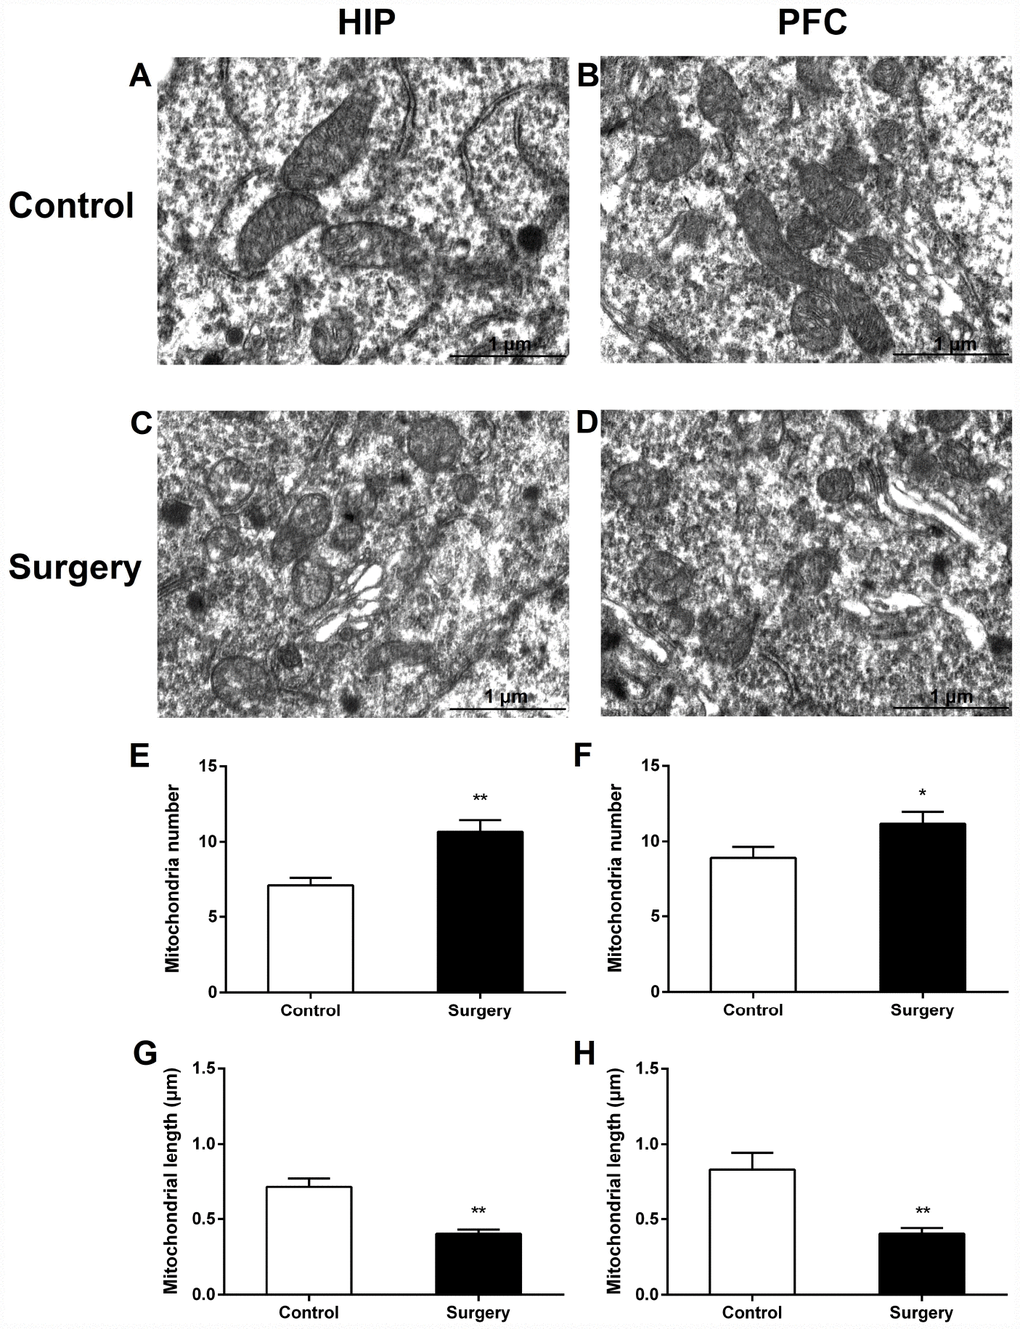 Surgery/Anesthesia caused ultrastructural changes in the mitochondria of hippocampal and prefrontal cortex neurons in aged mice at 24 hours postoperatively. Mitochondria in the cytoplasm of hippocampal (A) and prefrontal cortex (B) neurons from the control mice resemble long tubules with intact outer and inner membranes and numerous cristae tightly packed in healthy looking matrix. The number of mitochondria in the cytoplasm of hippocampal (C and E) and prefrontal cortex (D and F) neurons from mice in the Surgery/Anesthesia group were increased significantly. Compared to the control condition, Surgery/ Anesthesia decreased the mitochondrial length in the hippocampus (G) and prefrontal cortex (H) at 24 hours postoperatively. The mitochondria in the Surgery/Anesthesia group were small, round, and displayed globular morphology. Although the outer and inner membranes appeared somewhat intact, the cristae seemed distorted and difficult to discern. Scale bar: 1 μm. The data are plotted as the mean ± standard error of the mean for each group (n = 3). *p **p 